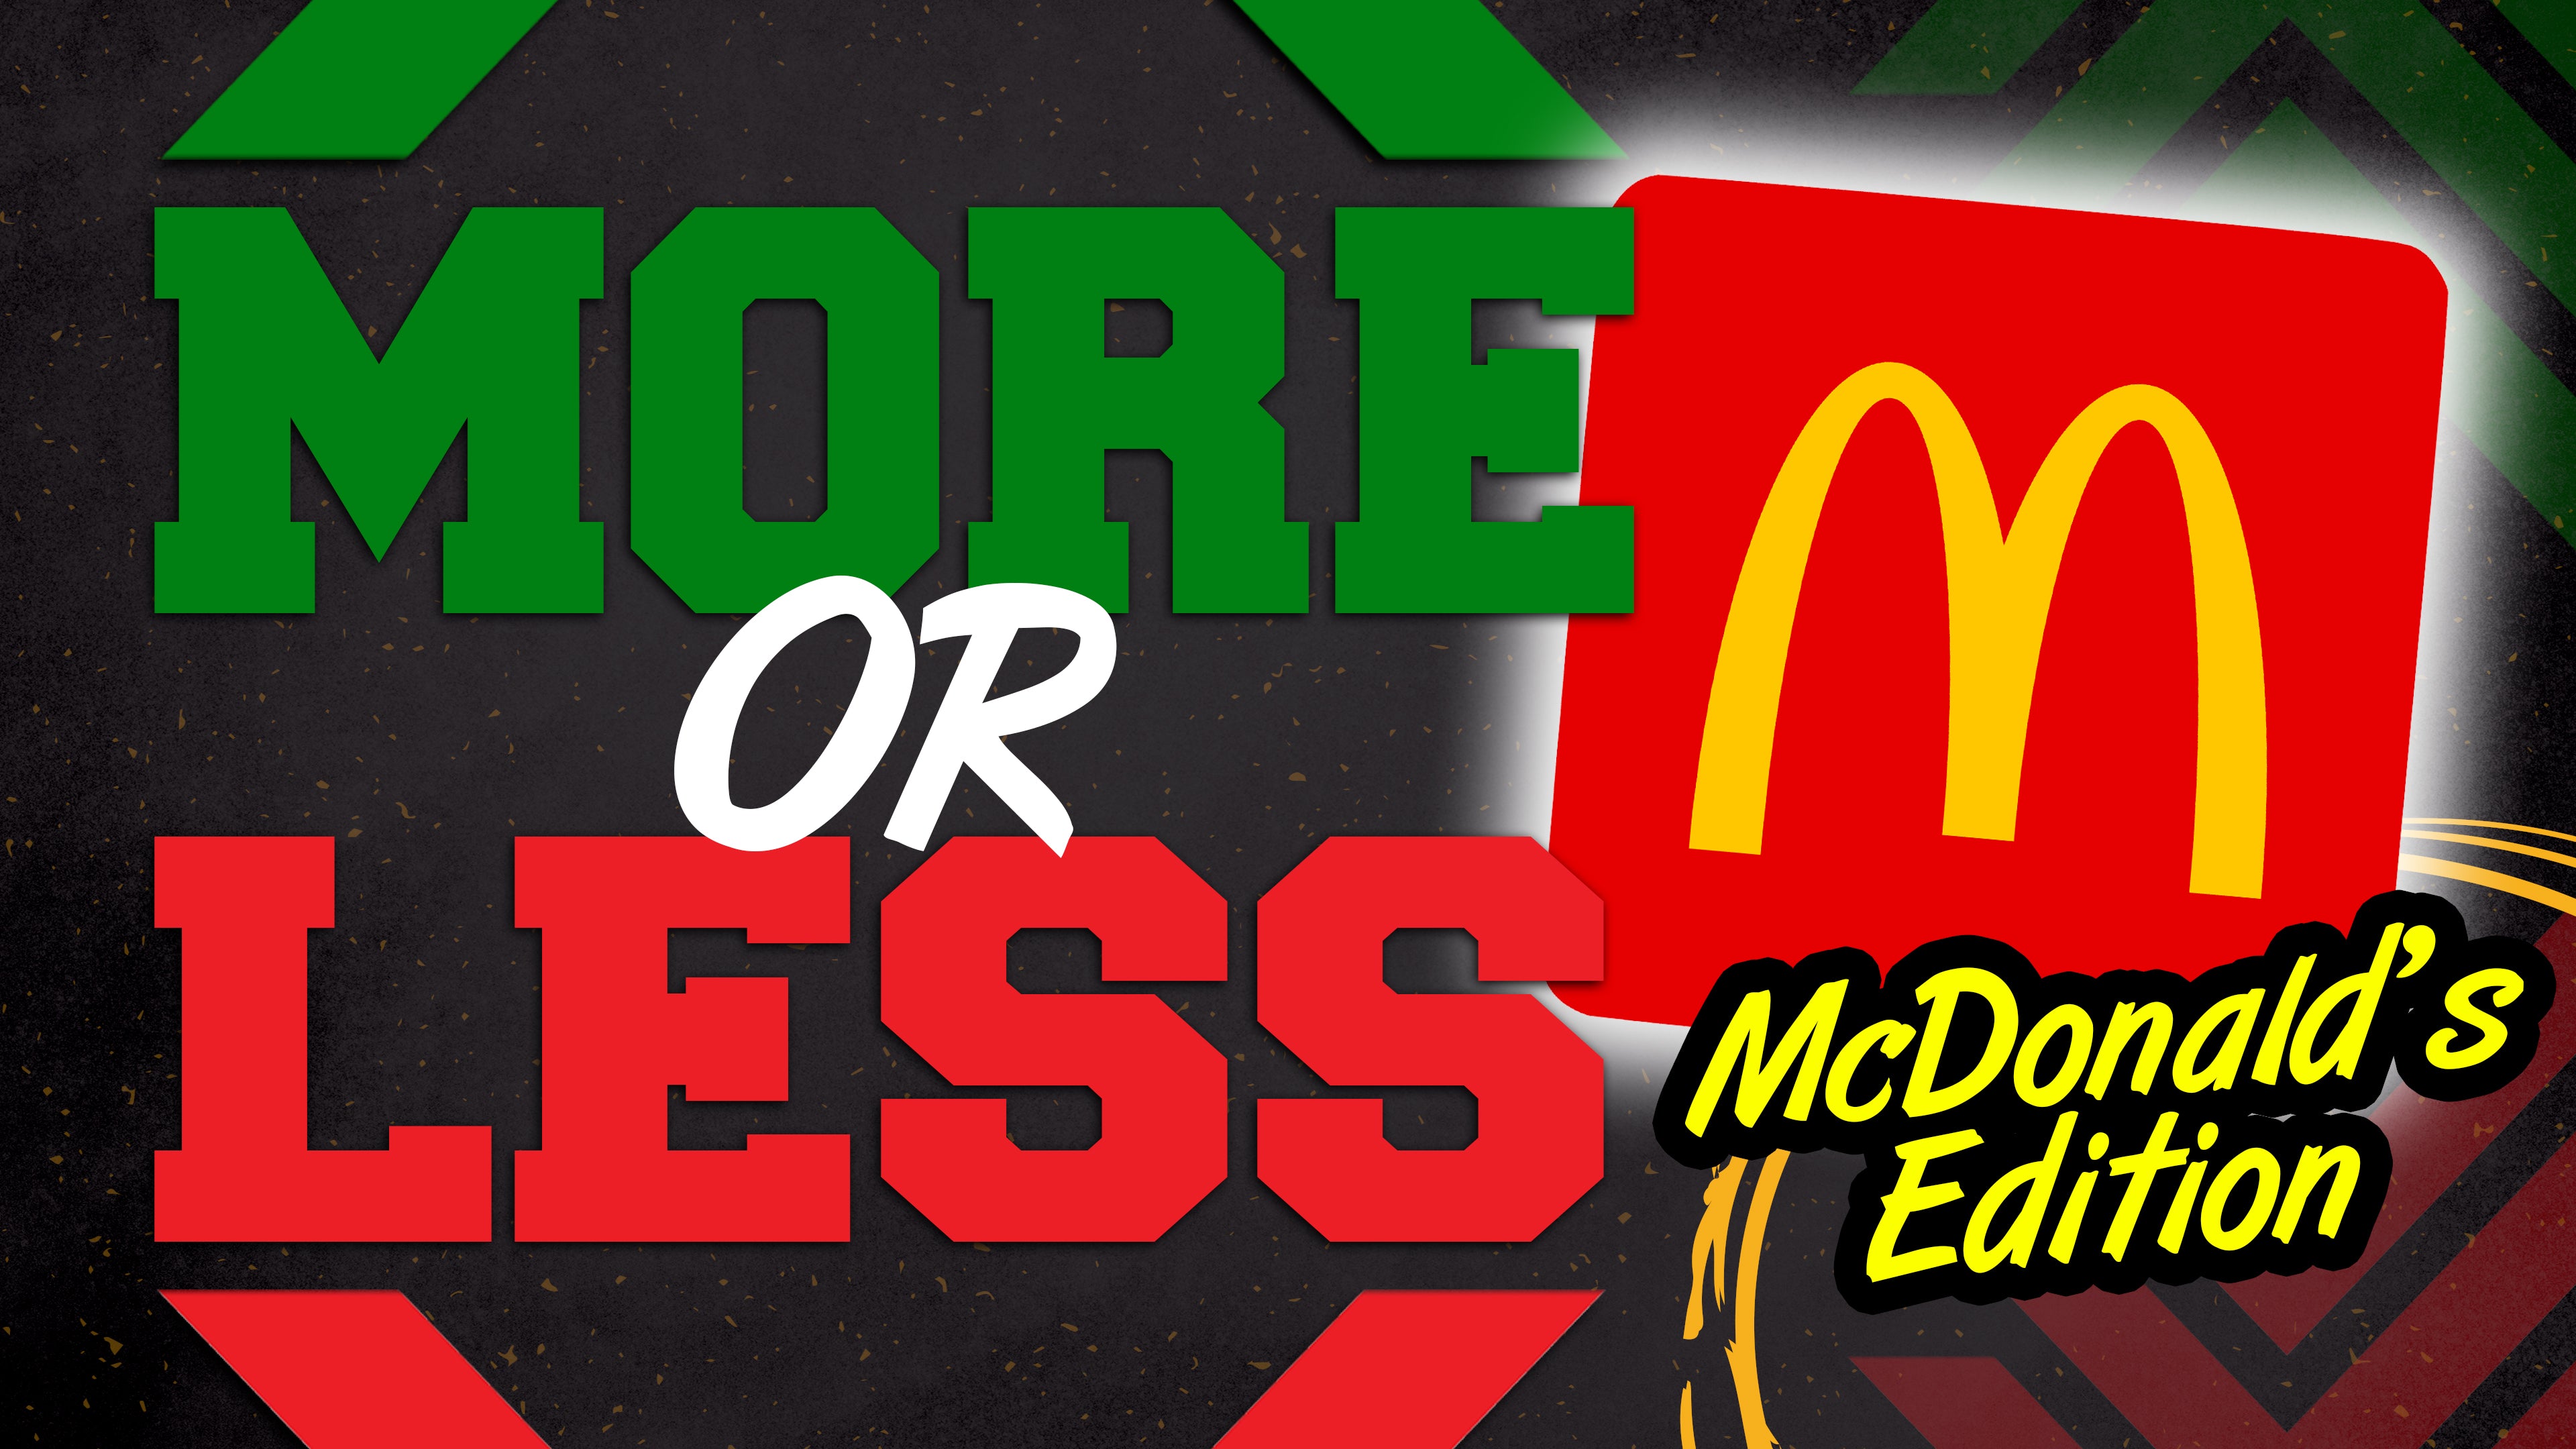 More or Less: McDonald's Edition